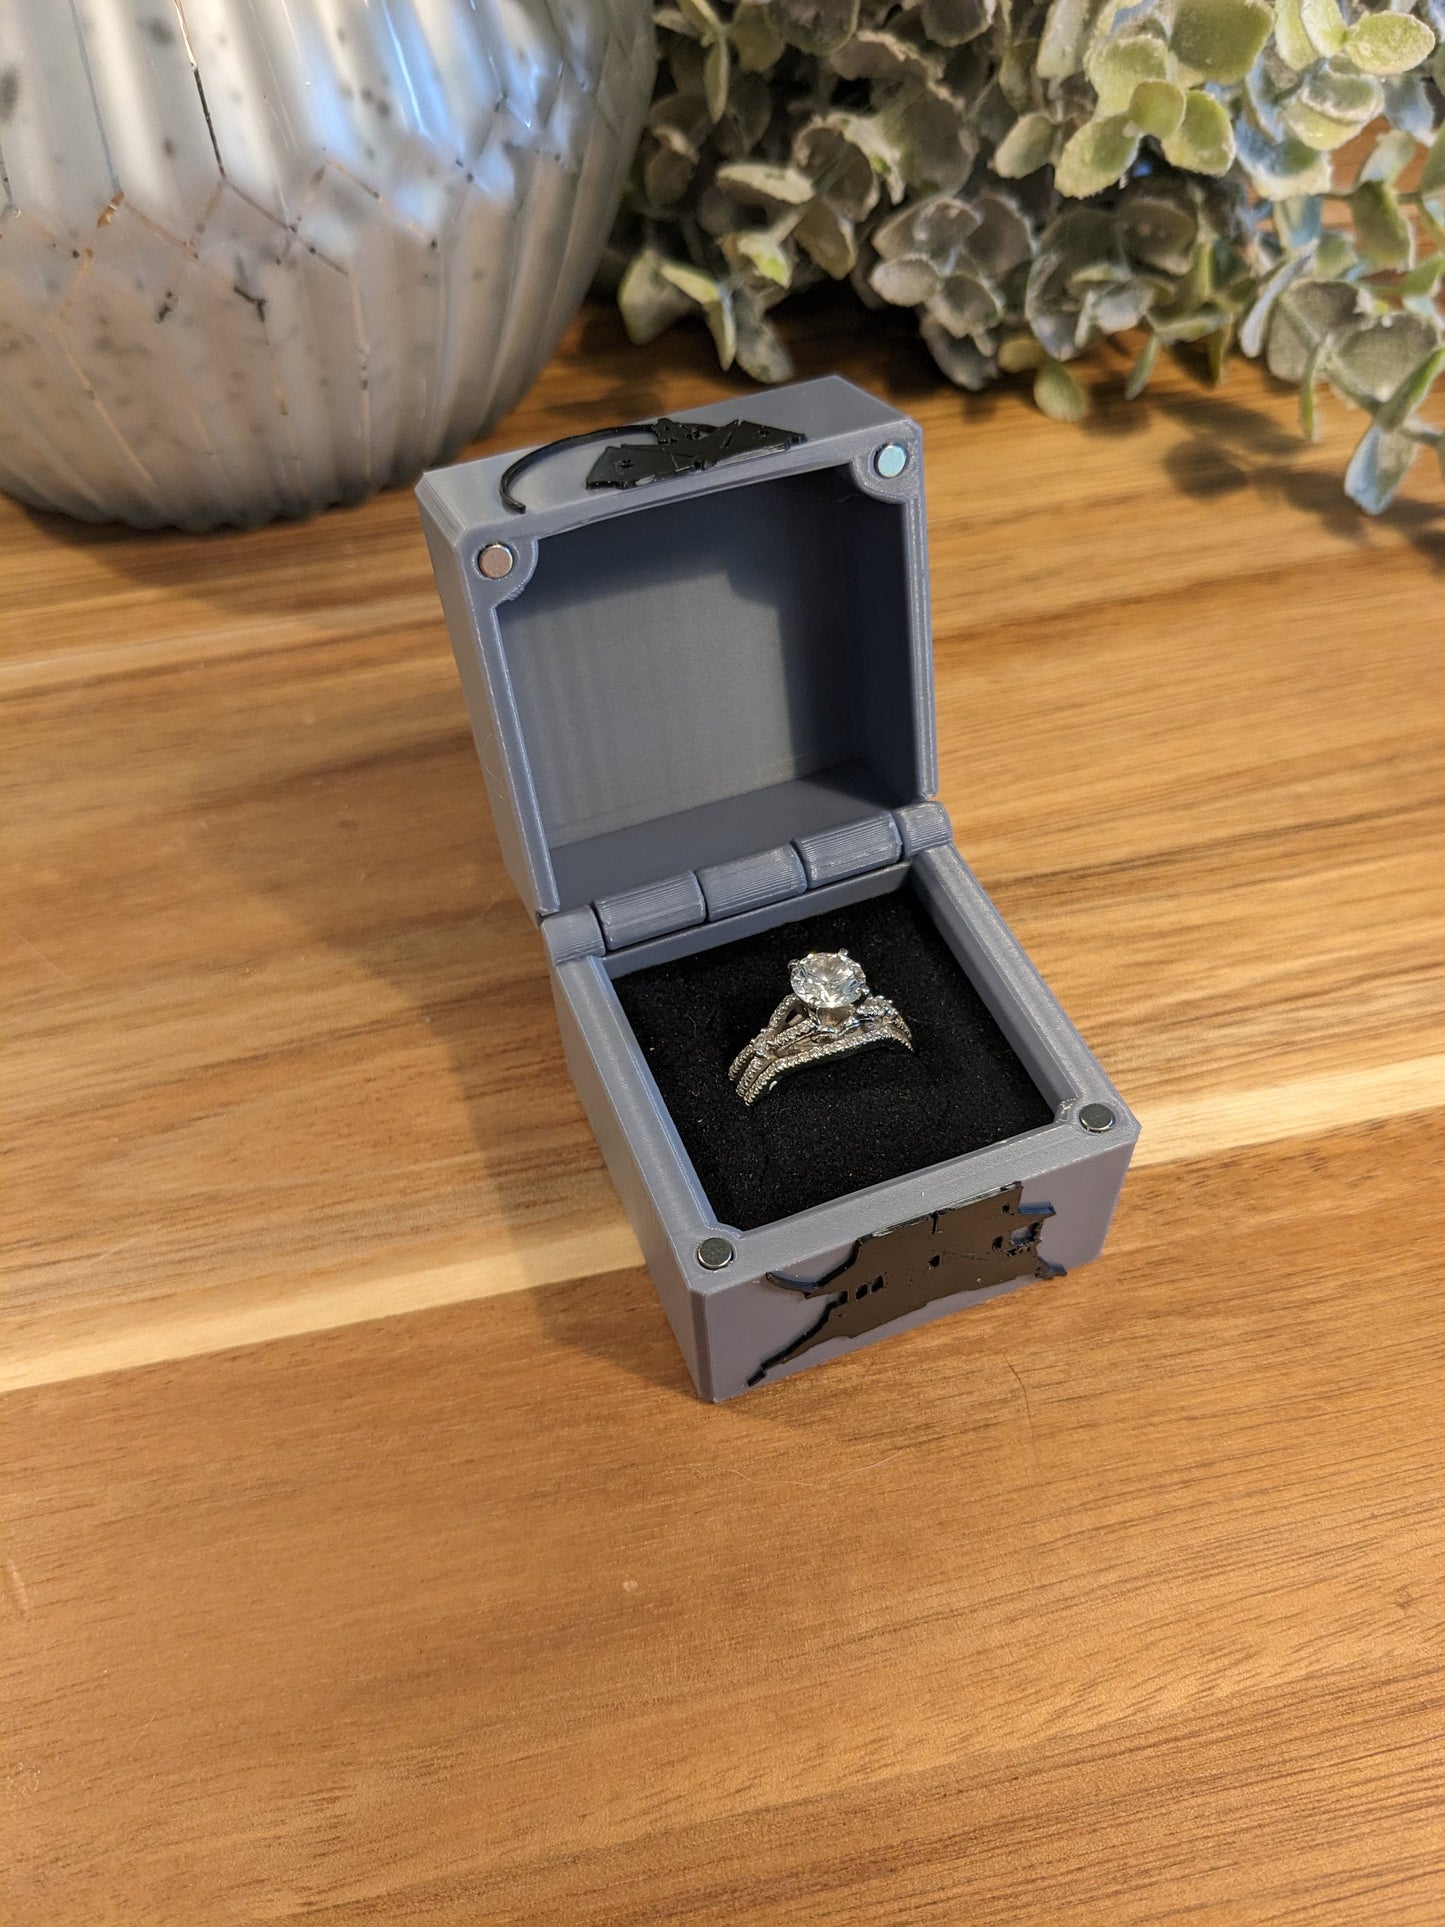 Halloween Scary House Ring Box (Proposal, Gift, Ring Bearer, ect)